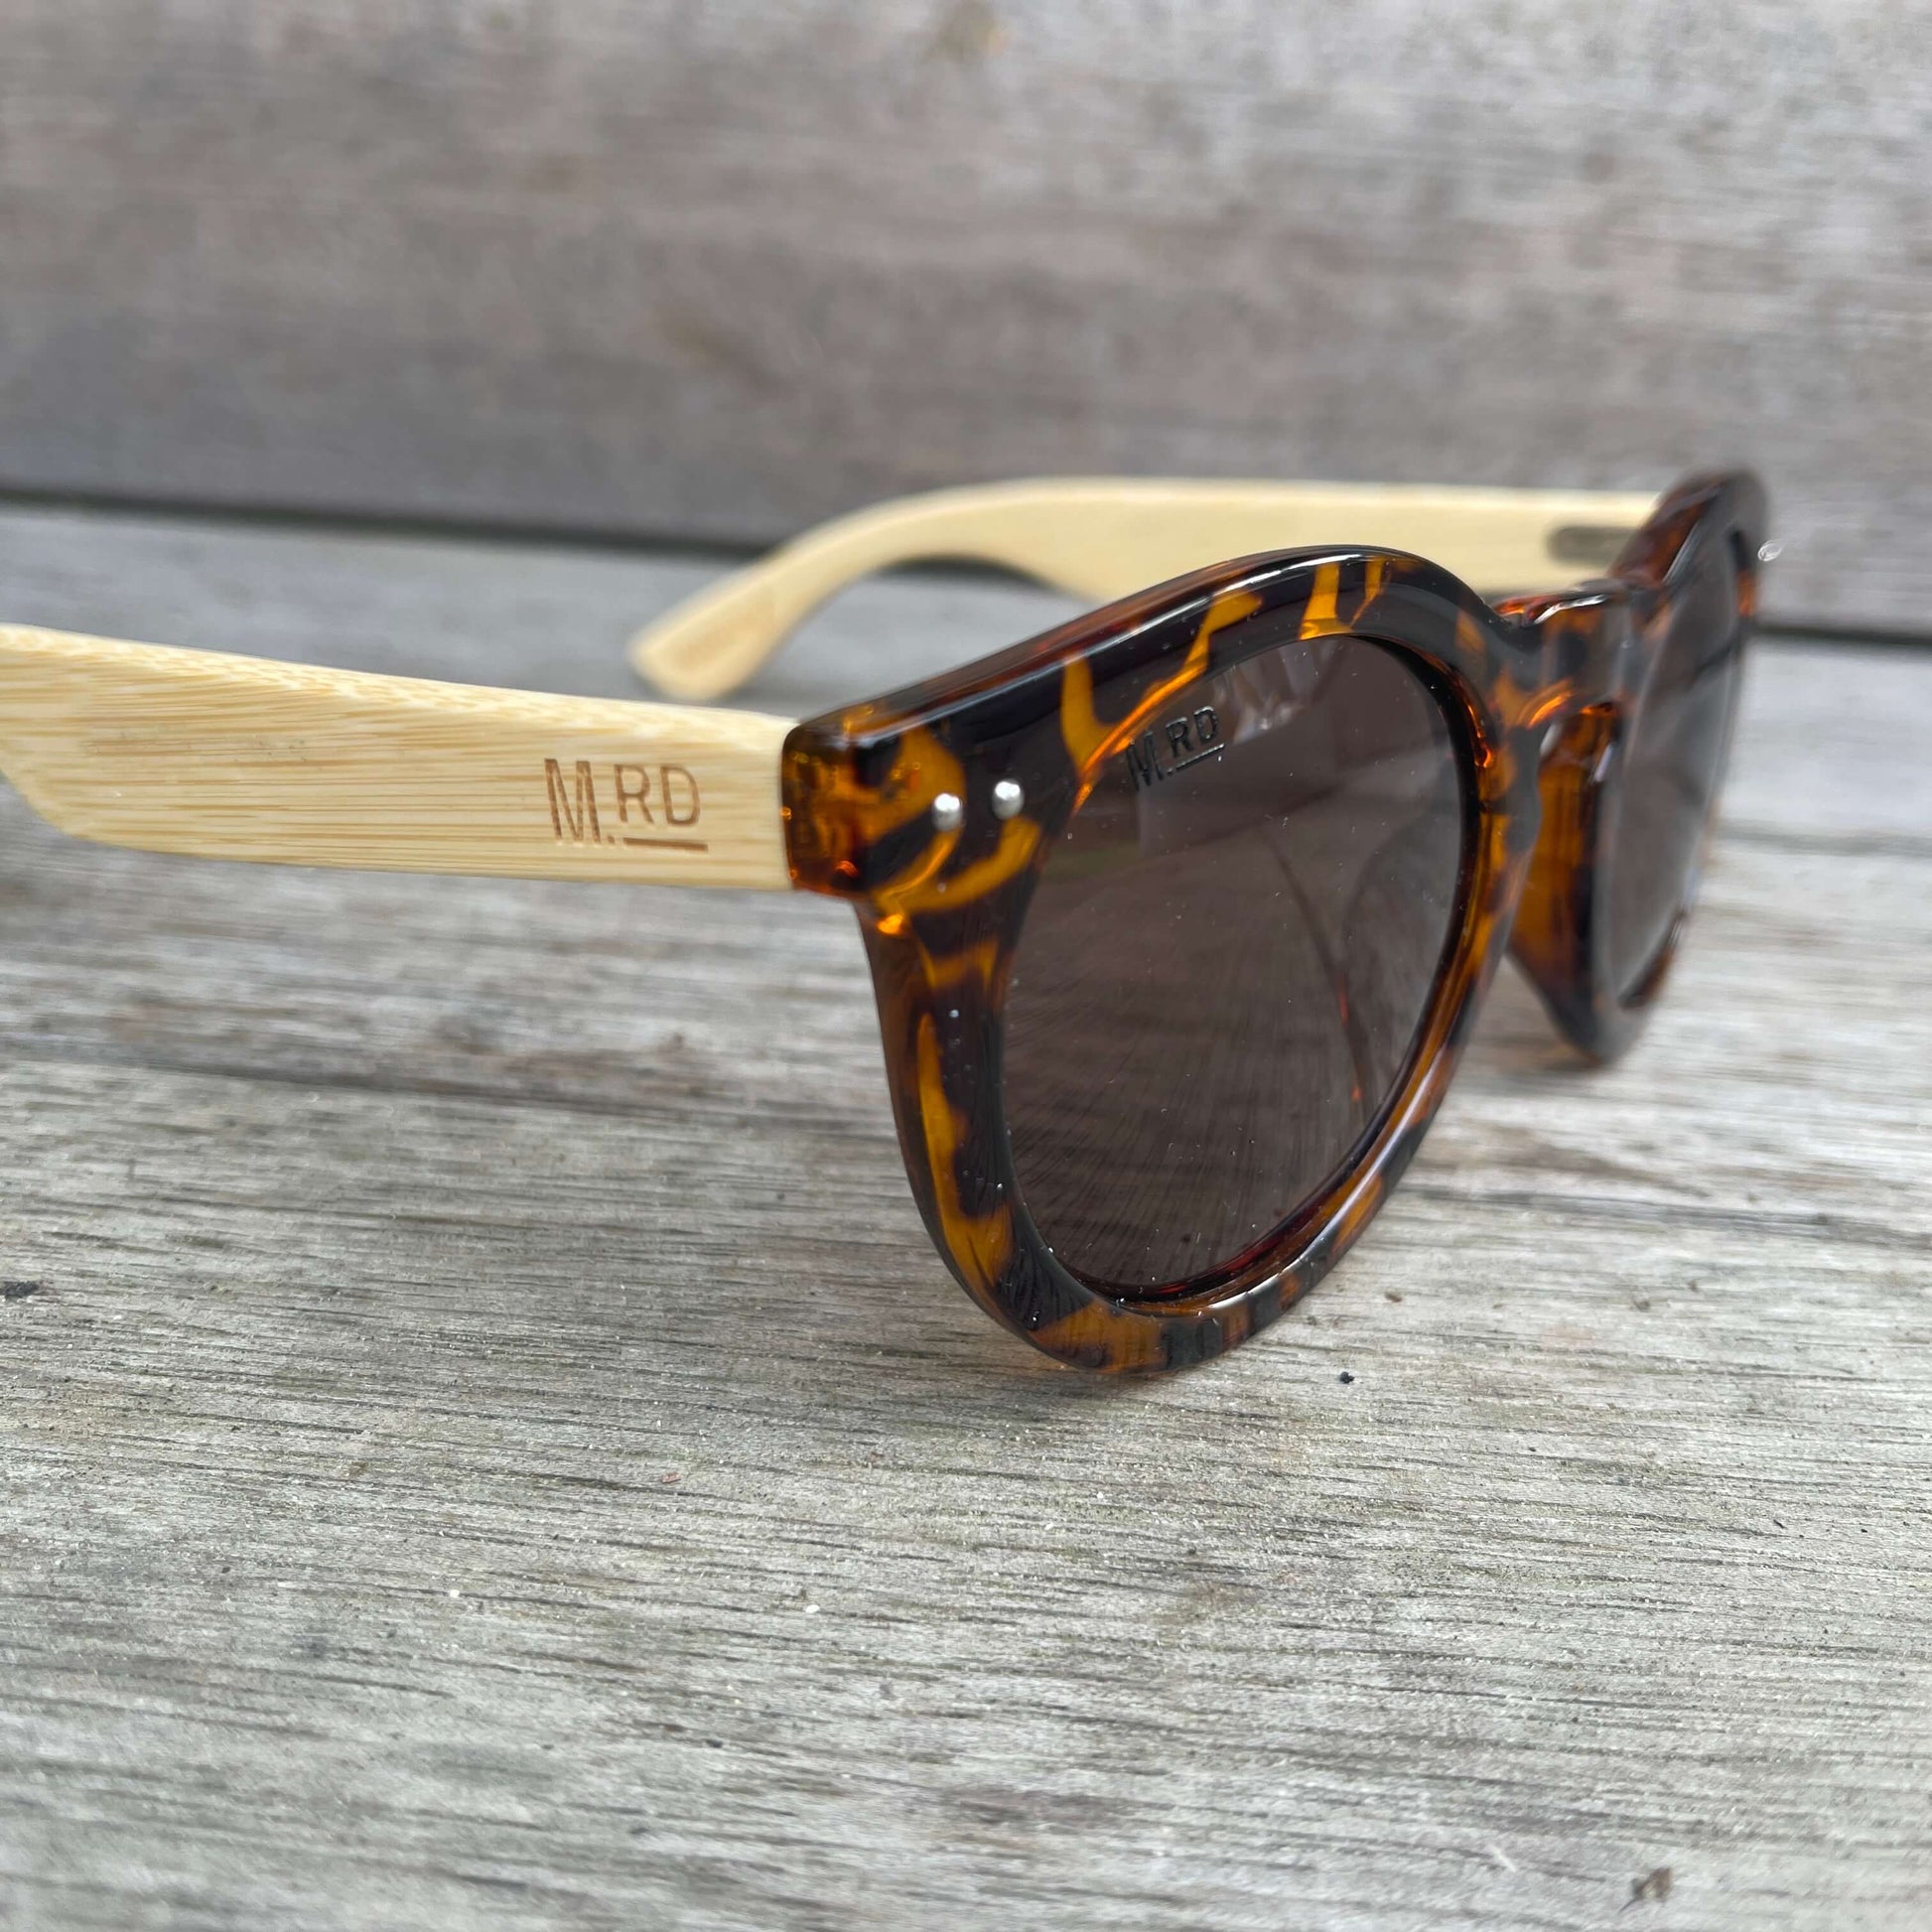 Womens sunglasses with brown tortoiseshell frames and bamboo arms in a Grace Kelly style.